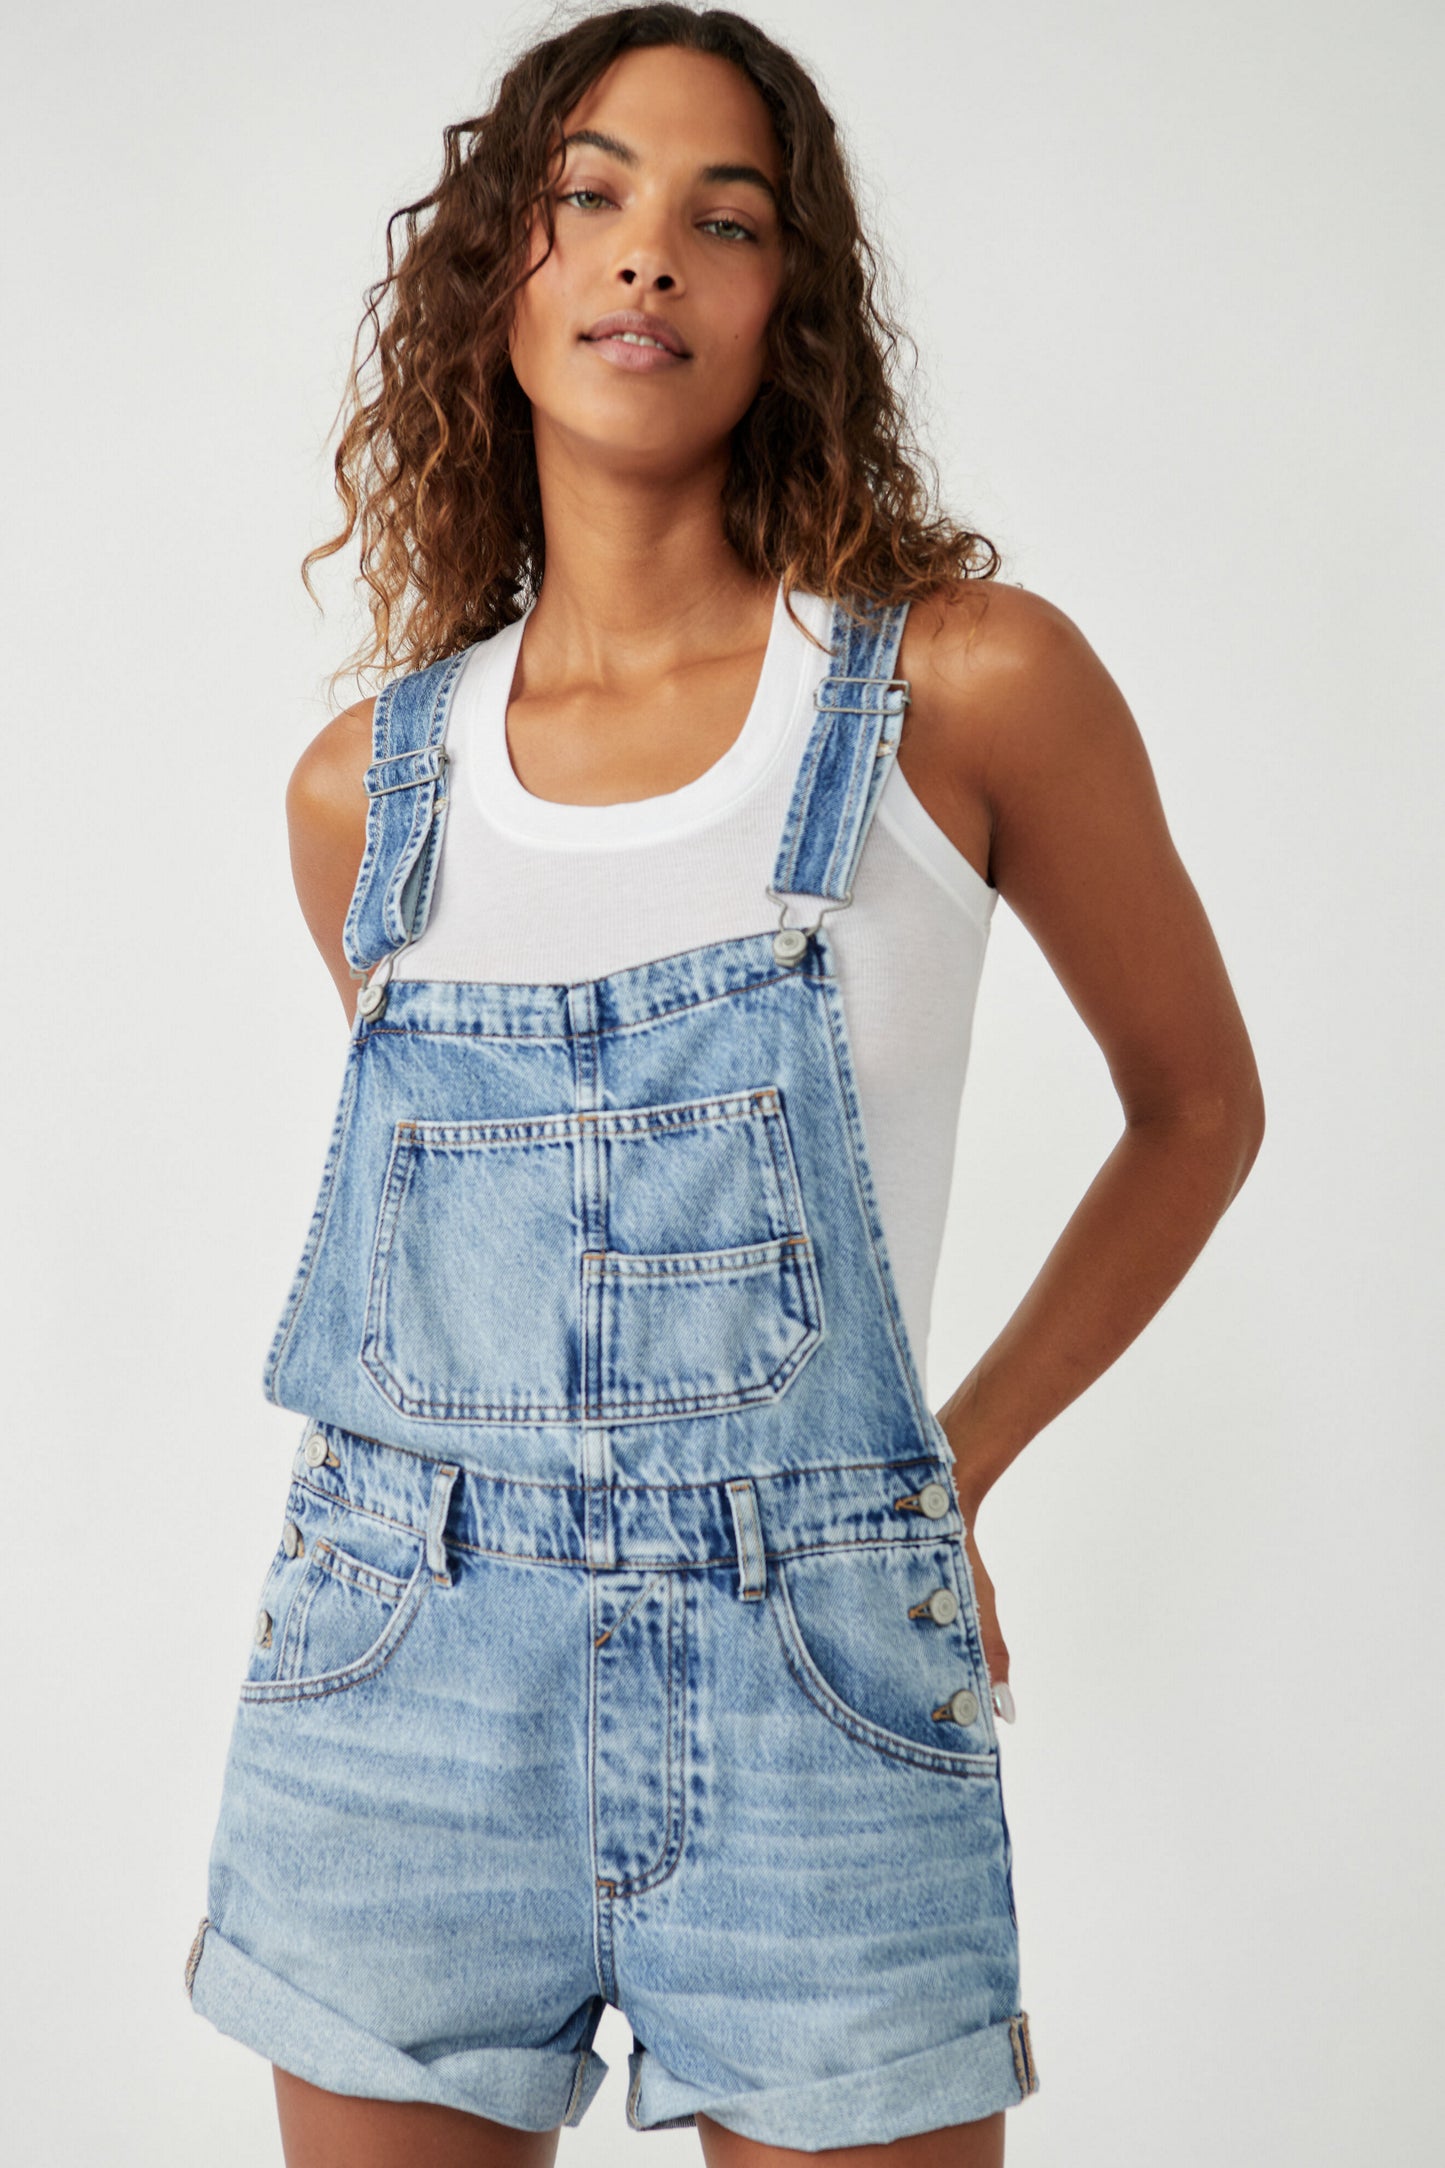 Front view of the Free People Ziggy Shortall in medium wash denim color